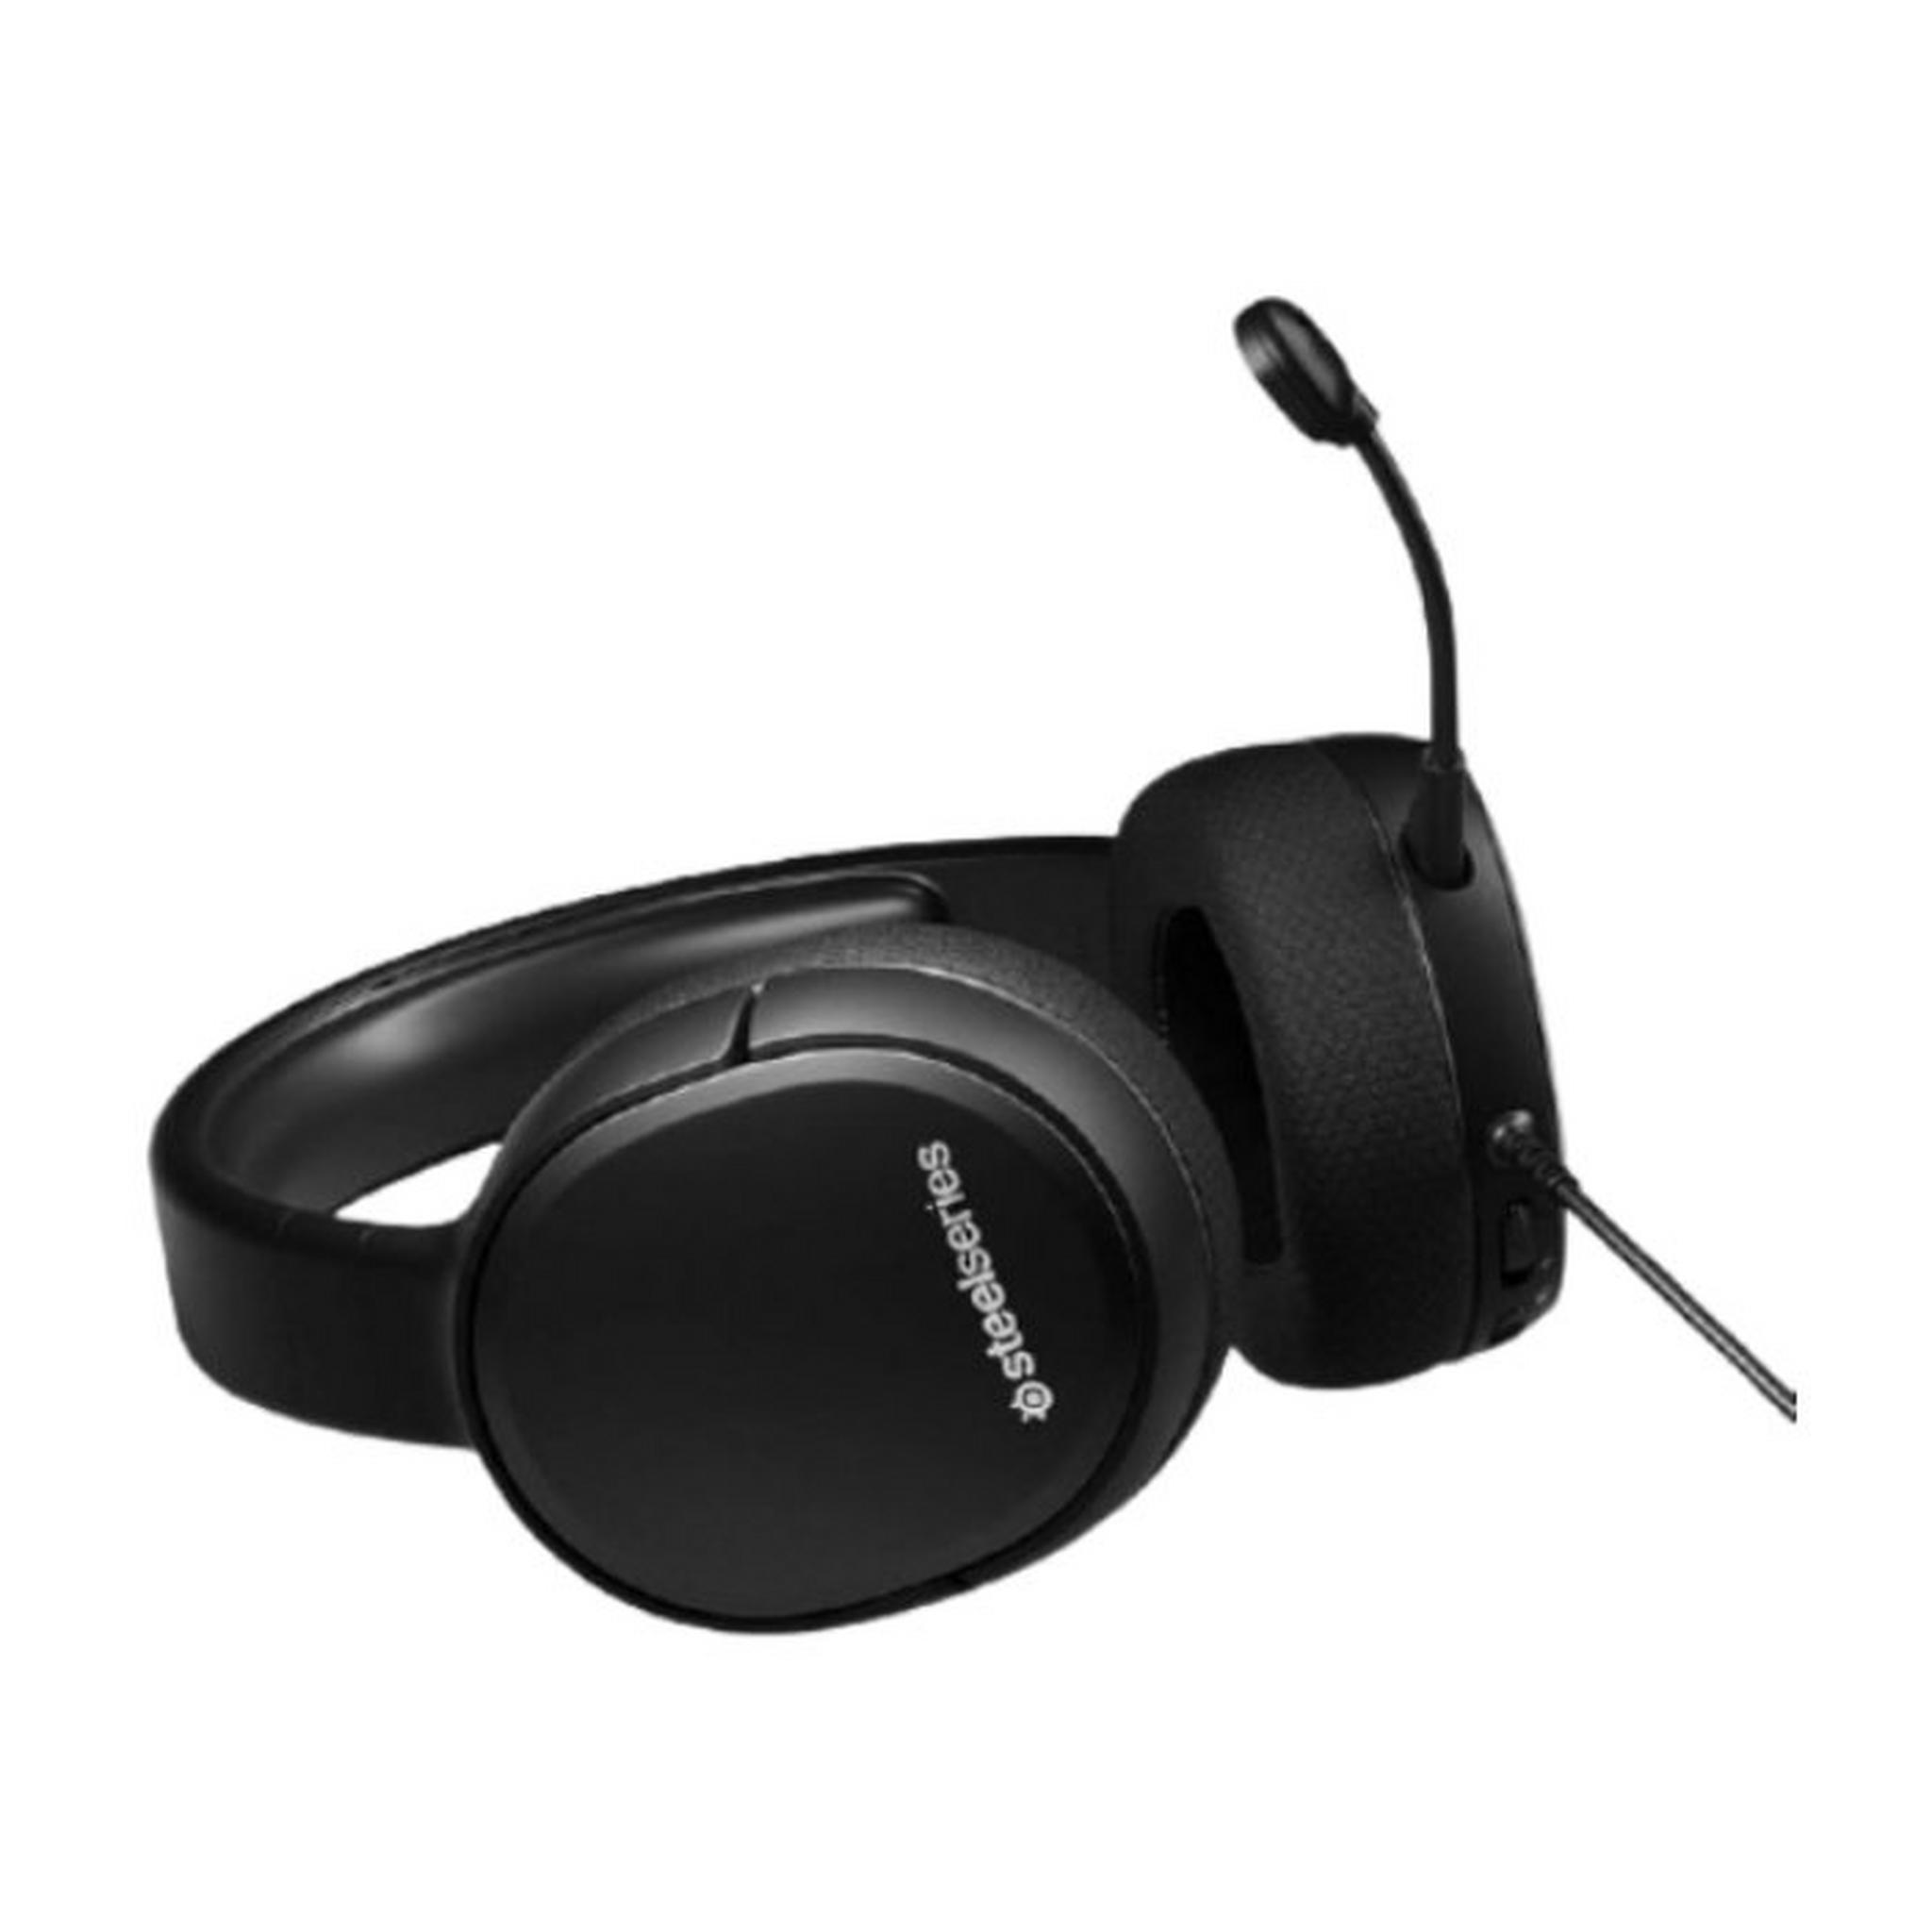 SteelSeries Arctis 1 Wired Gaming Headset